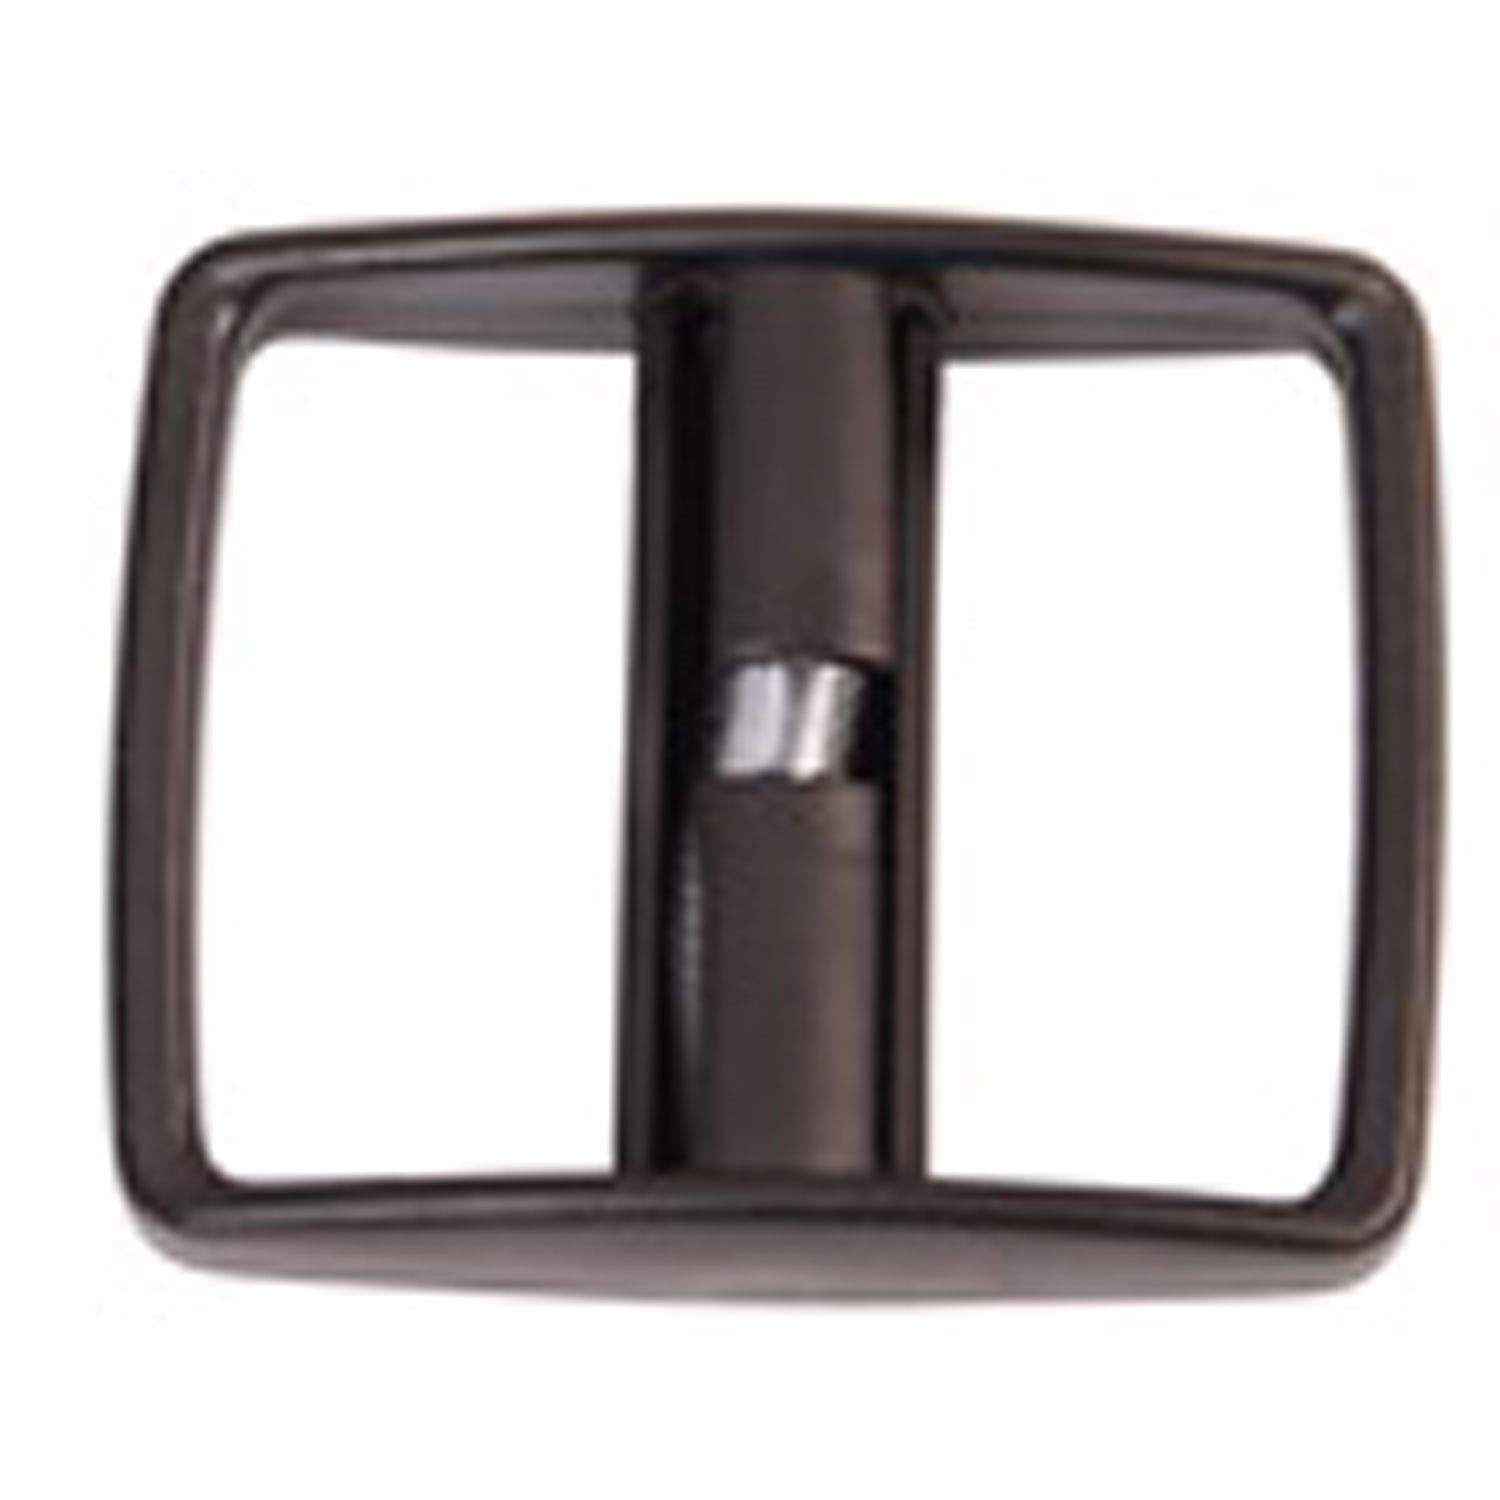 This seat belt retractor from Rugged Ridge is designed to make standard lap belts retractable. Fits